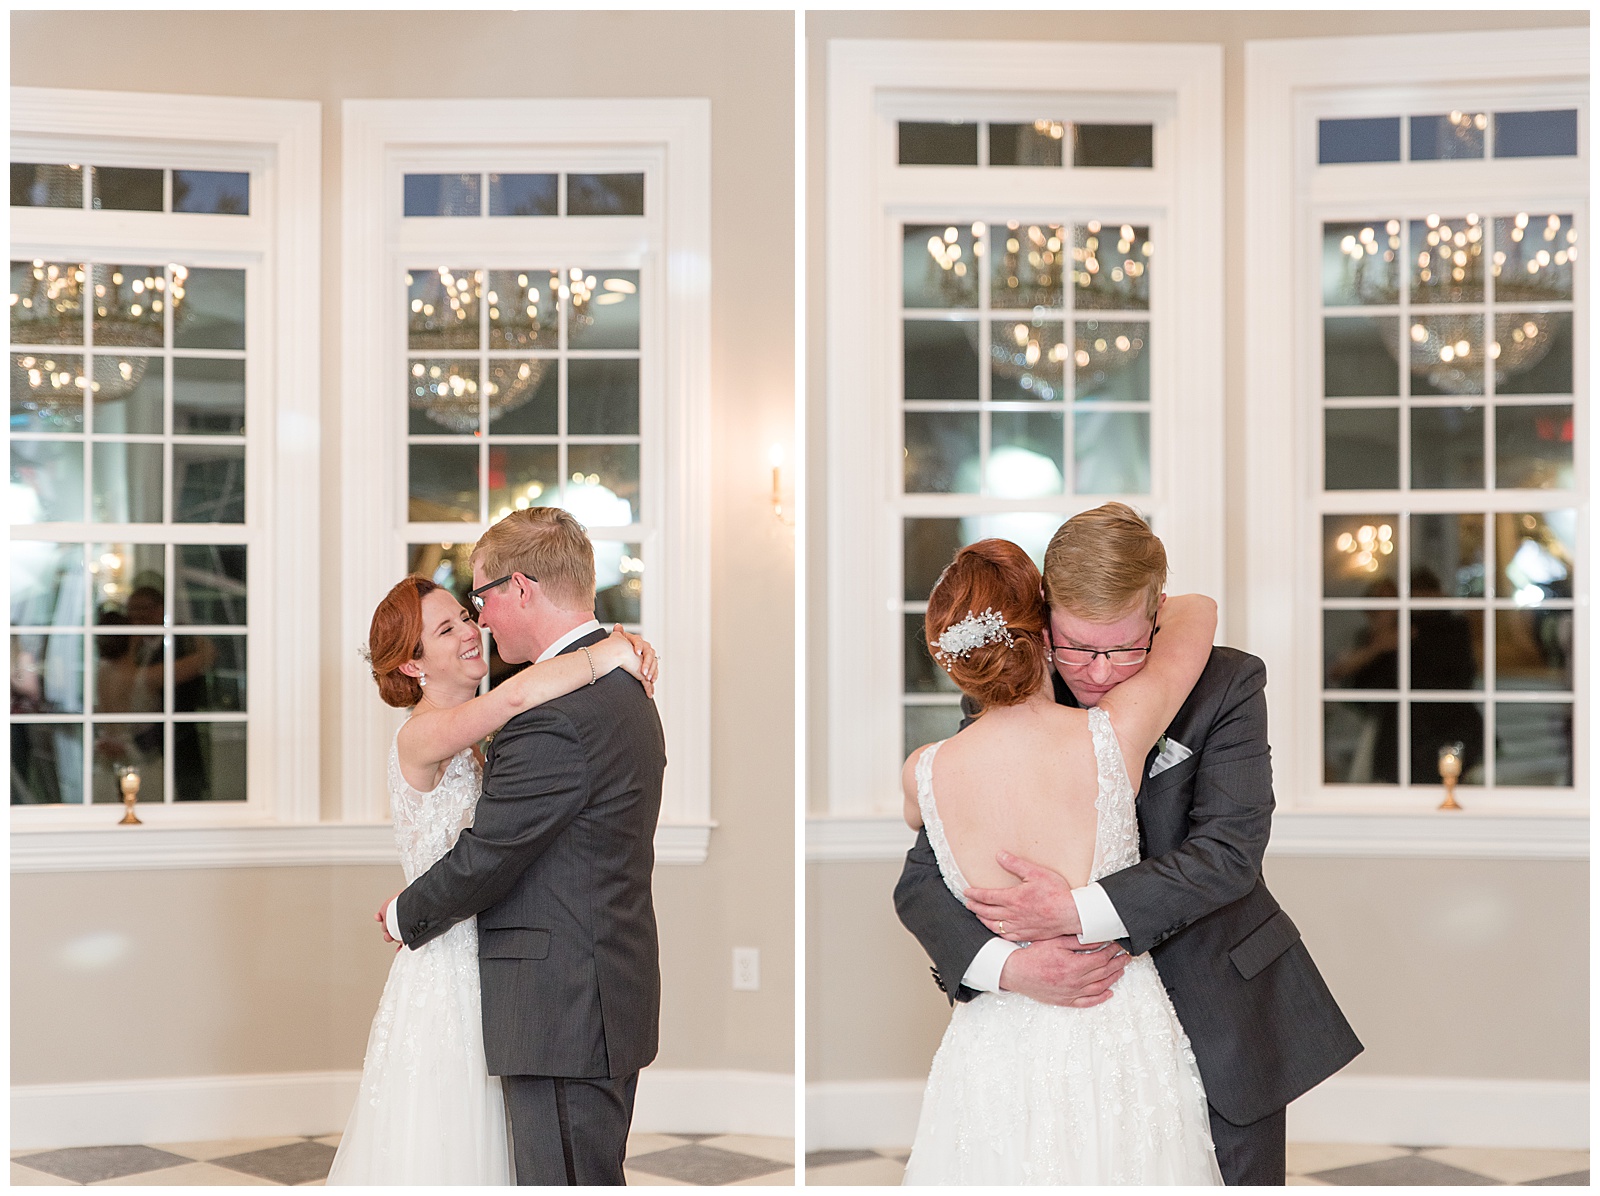 bride and groom hug as they share their first dance as husband and wife during indoor wedding reception at cameron estate inn